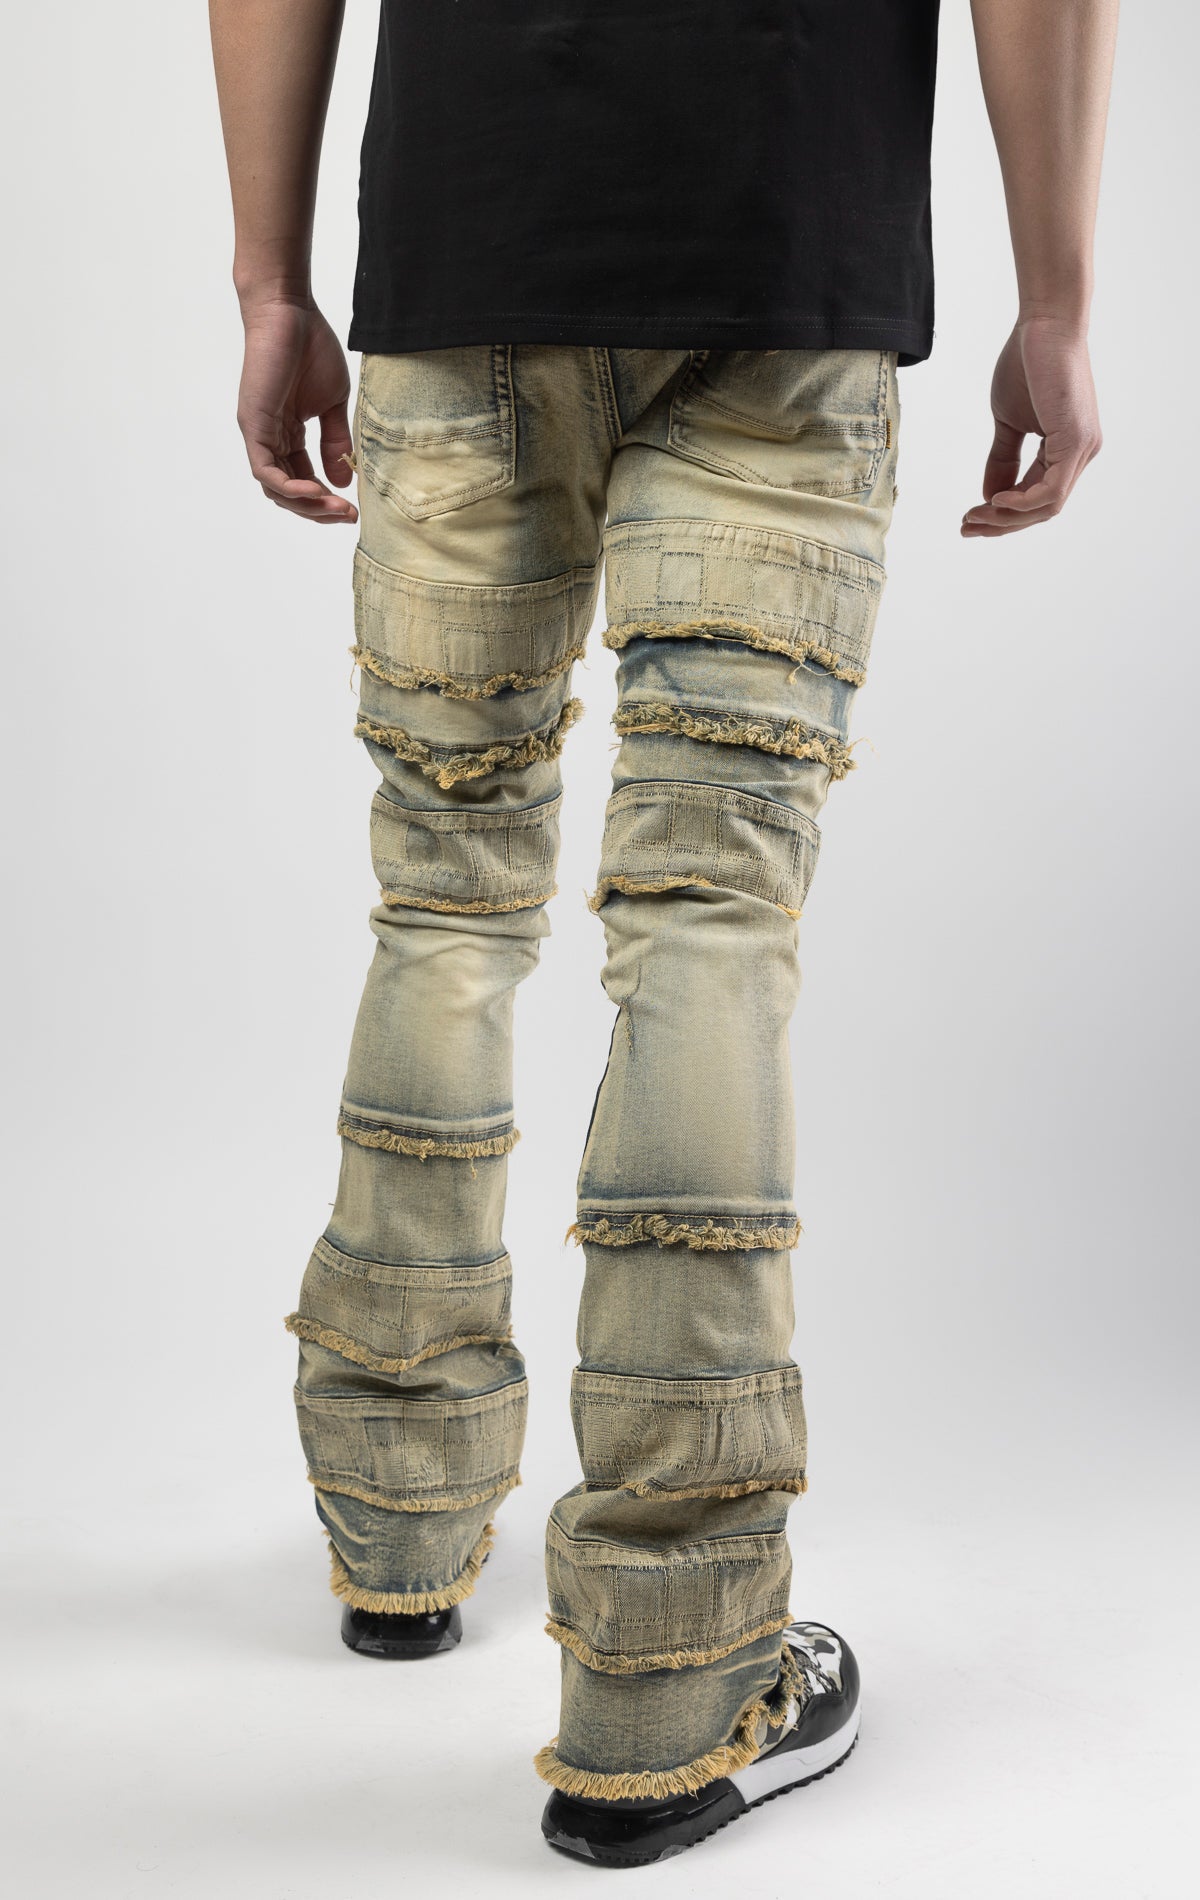 Dirt wash iconic stacked jeans crafted from high-quality, durable denim fabric consisting of 98% cotton and 2% spandex with a semi flare silhouette and a length of 35"-37". Featuring a distinctive ripped and repair design with pocket patches and a multi-tone dye throughout, these urban-inspired pants are true to size